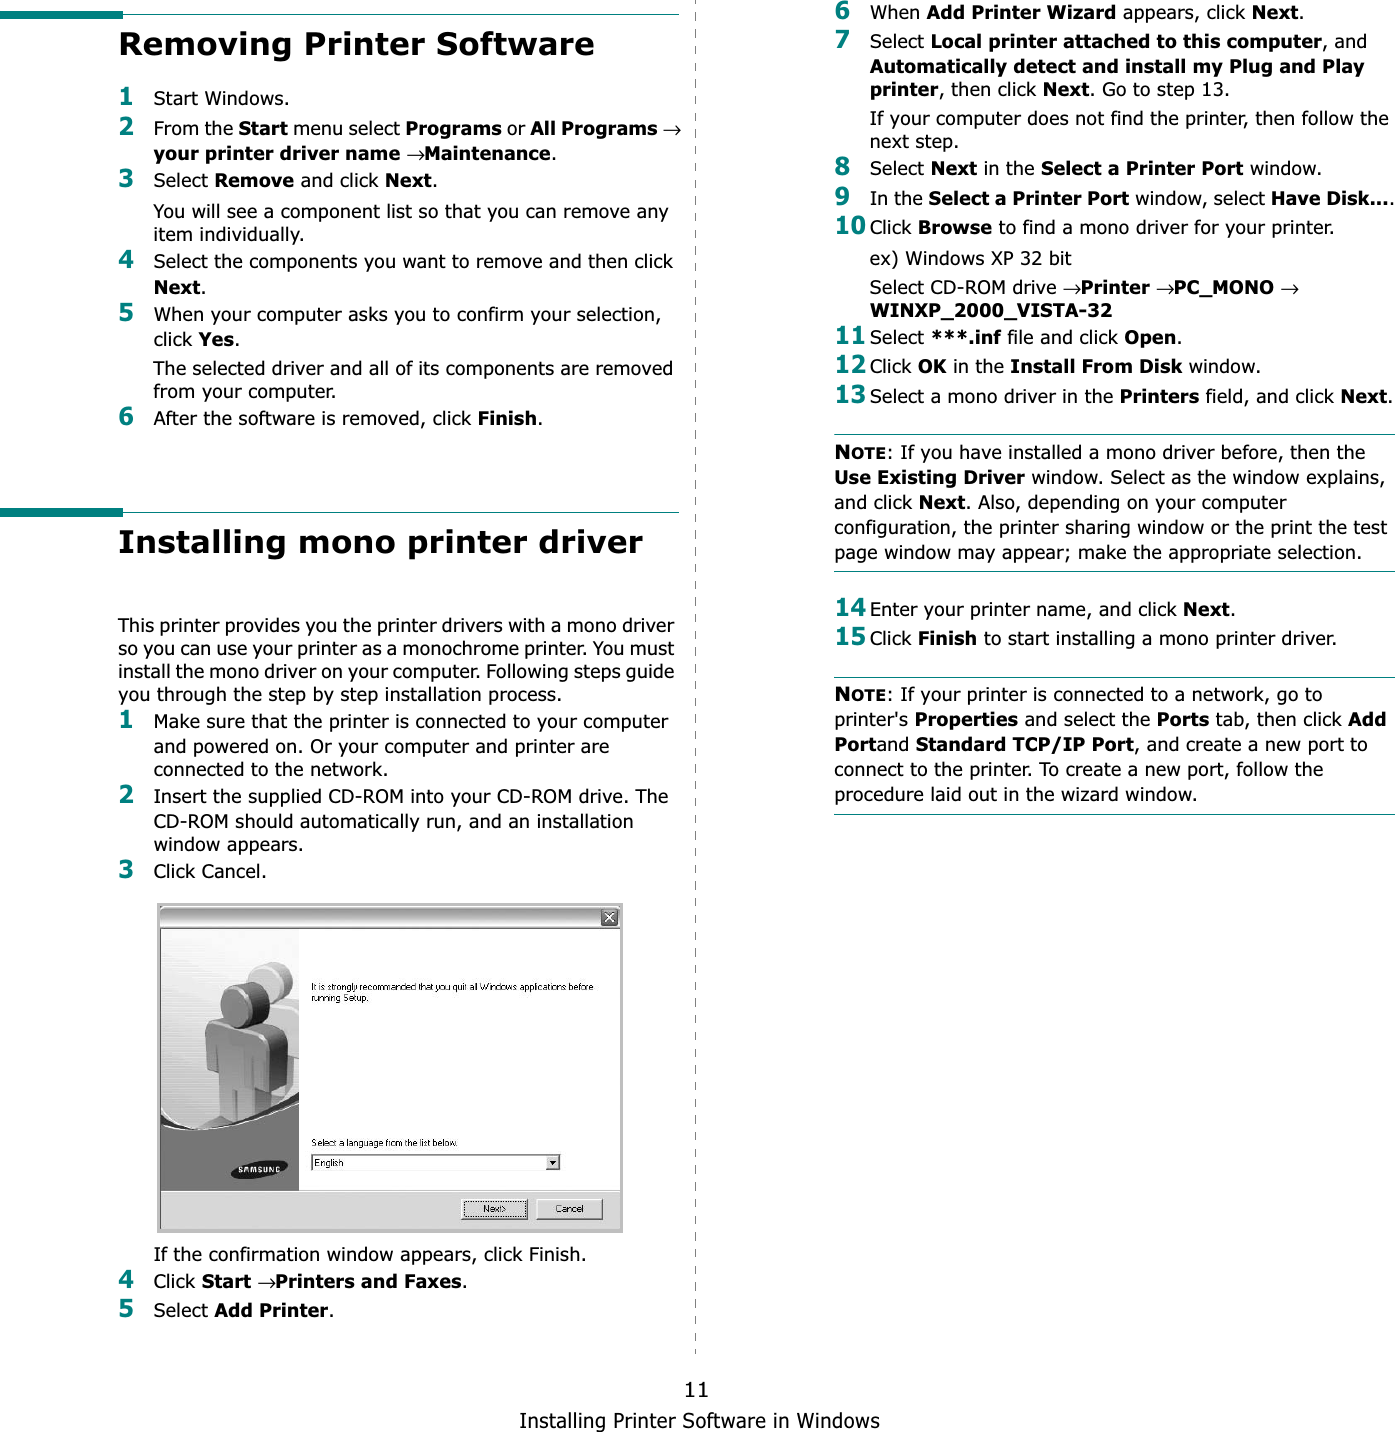 Installing Printer Software in Windows11Removing Printer Software1Start Windows.2From the Start menu select Programs or All Programs→your printer driver name → Maintenance.3Select Remove and click Next.You will see a component list so that you can remove any item individually.4Select the components you want to remove and then click Next.5When your computer asks you to confirm your selection, click Yes.The selected driver and all of its components are removed from your computer.6After the software is removed, click Finish.Installing mono printer driverThis printer provides you the printer drivers with a mono driver so you can use your printer as a monochrome printer. You must install the mono driver on your computer. Following steps guide you through the step by step installation process.1Make sure that the printer is connected to your computer and powered on. Or your computer and printer are connected to the network.2Insert the supplied CD-ROM into your CD-ROM drive. The CD-ROM should automatically run, and an installation window appears.3Click Cancel. If the confirmation window appears, click Finish.4Click Start→Printers and Faxes.5Select Add Printer.6When Add Printer Wizard appears, click Next.7Select Local printer attached to this computer, and Automatically detect and install my Plug and Play printer, then click Next. Go to step 13.If your computer does not find the printer, then follow the next step.8Select Next in the Select a Printer Port window.9In the Select a Printer Port window, select Have Disk....10Click Browse to find a mono driver for your printer.ex) Windows XP 32 bitSelect CD-ROM drive →Printer→PC_MONO→WINXP_2000_VISTA-3211Select ***.inf file and click Open.12Click OK in the Install From Disk window.13Select a mono driver in the Printers field, and click Next.NOTE: If you have installed a mono driver before, then the Use Existing Driver window. Select as the window explains, and click Next. Also, depending on your computer configuration, the printer sharing window or the print the test page window may appear; make the appropriate selection.14Enter your printer name, and click Next.15Click Finish to start installing a mono printer driver.NOTE: If your printer is connected to a network, go to printer&apos;s Properties and select the Ports tab, then click Add Portand Standard TCP/IP Port, and create a new port to connect to the printer. To create a new port, follow the procedure laid out in the wizard window.